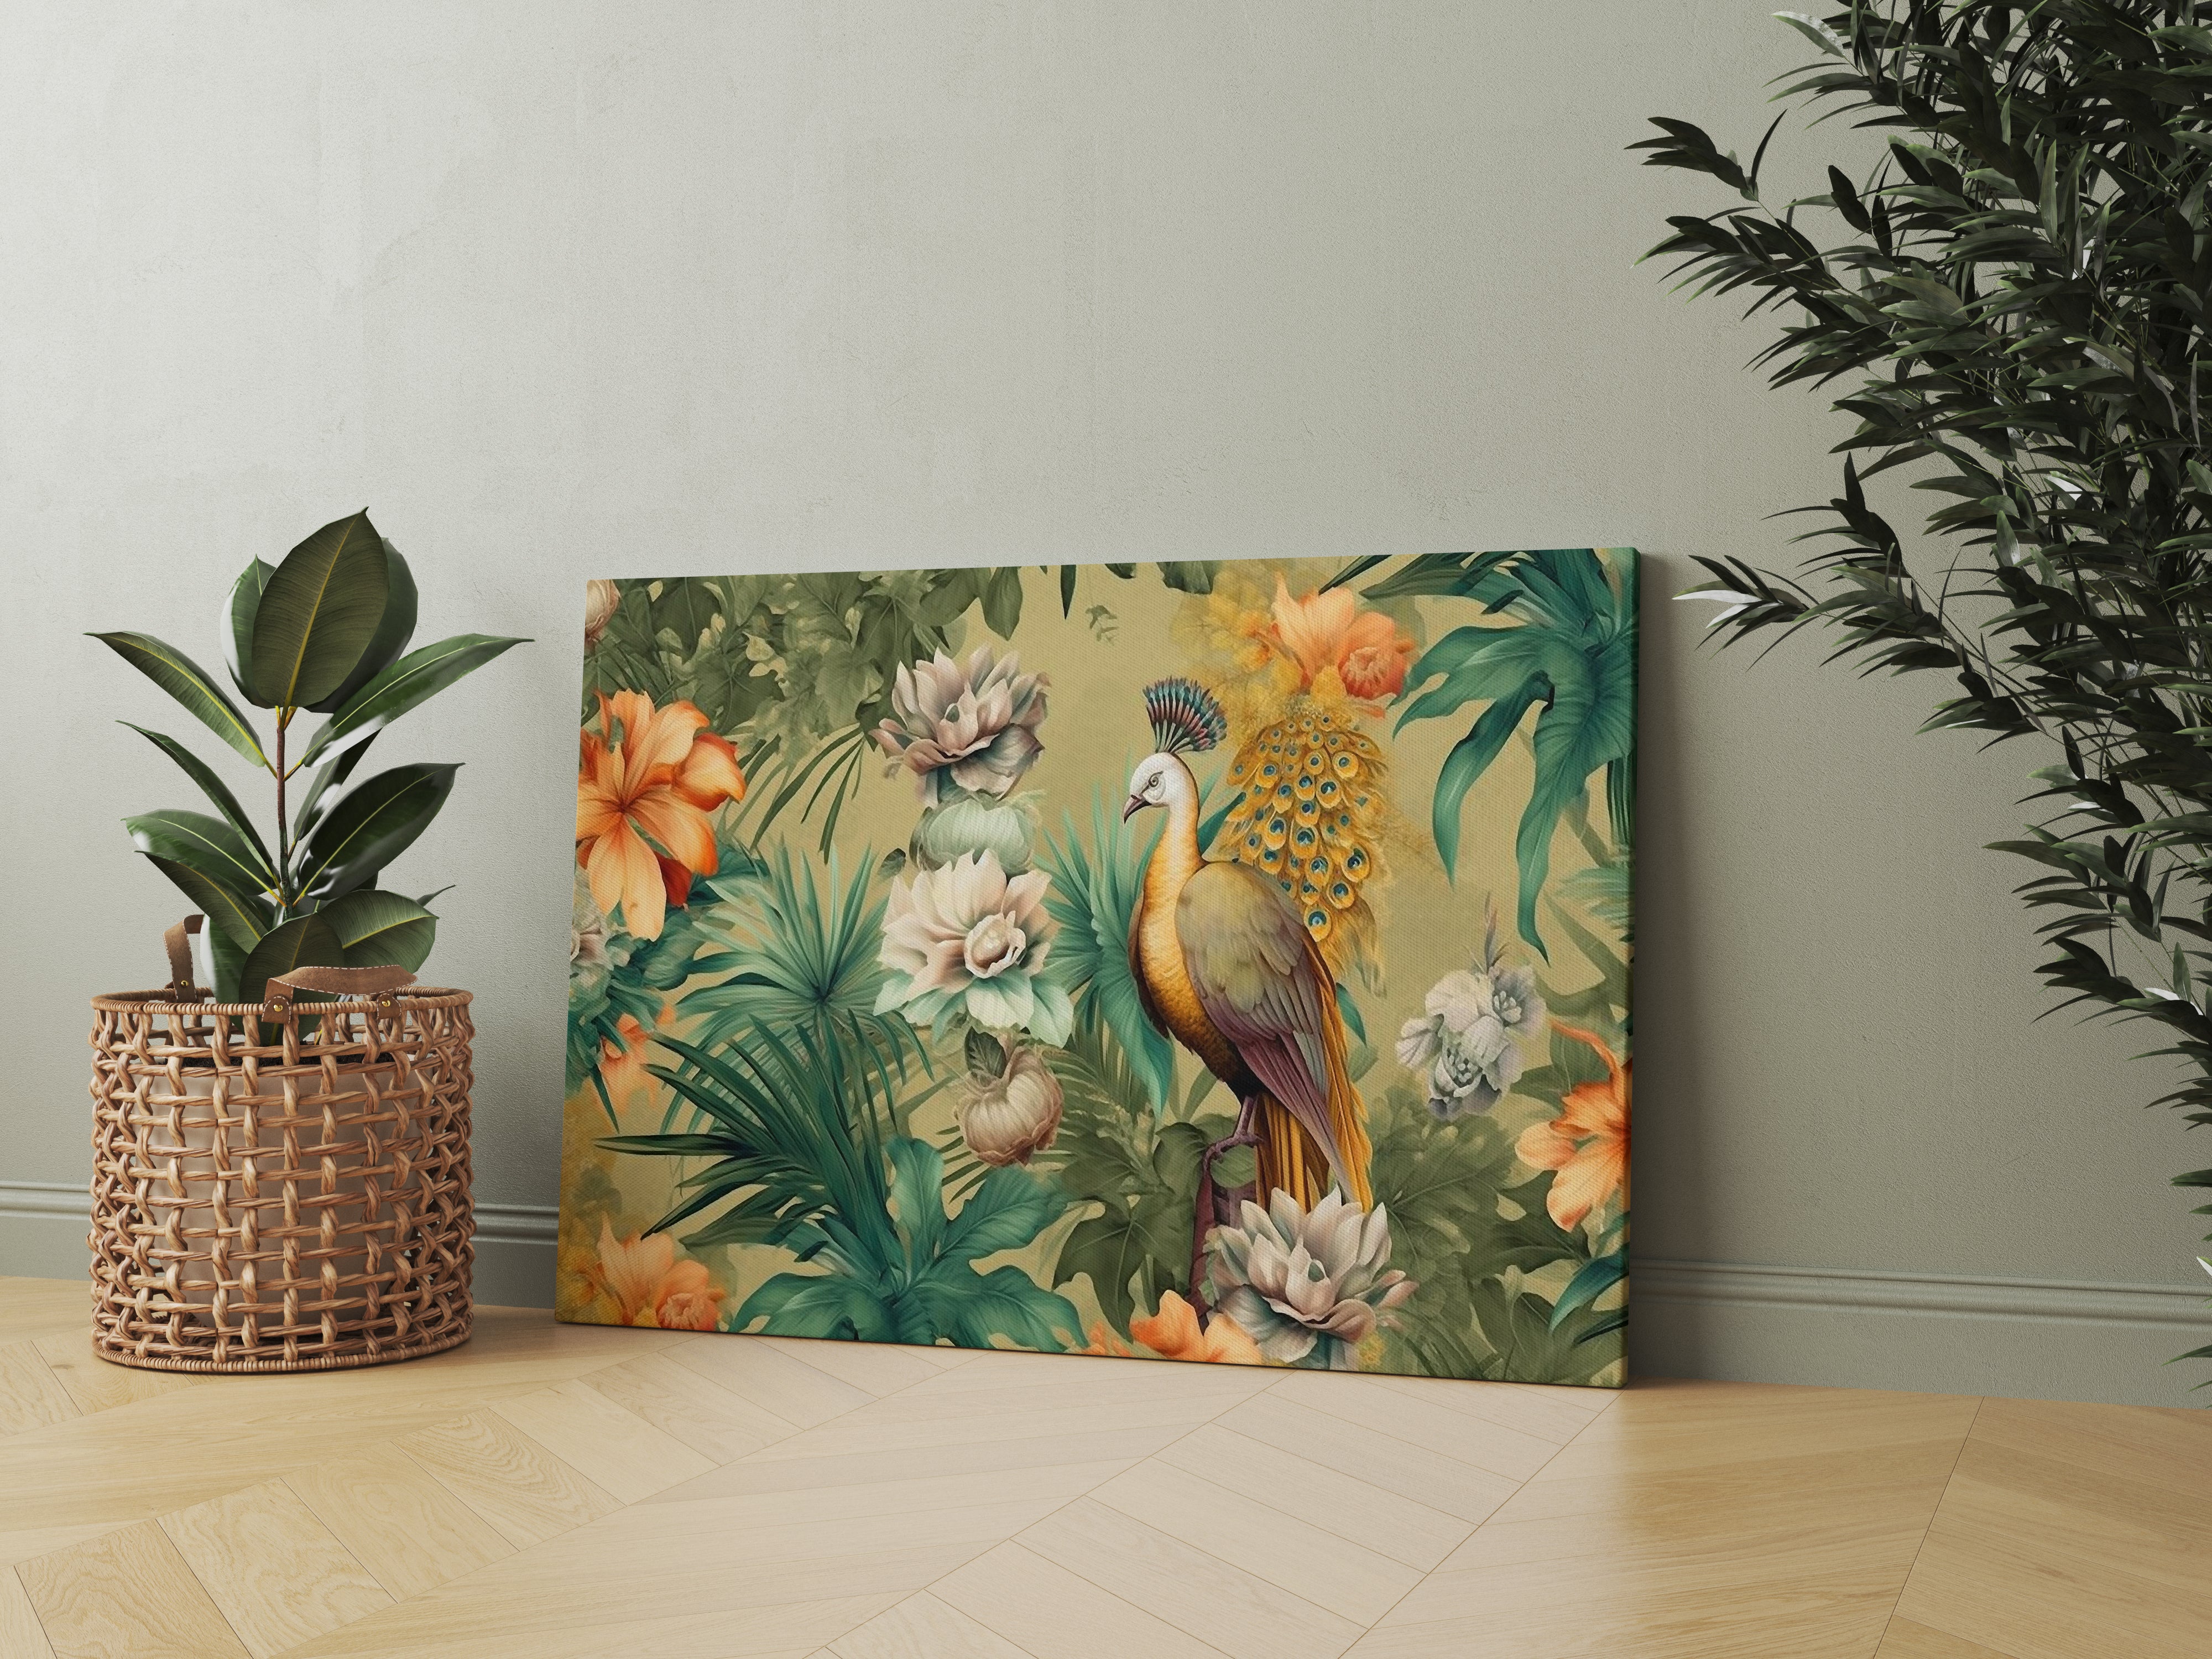 Peacock and Flowers Abstract Art Canvas Wall Painting